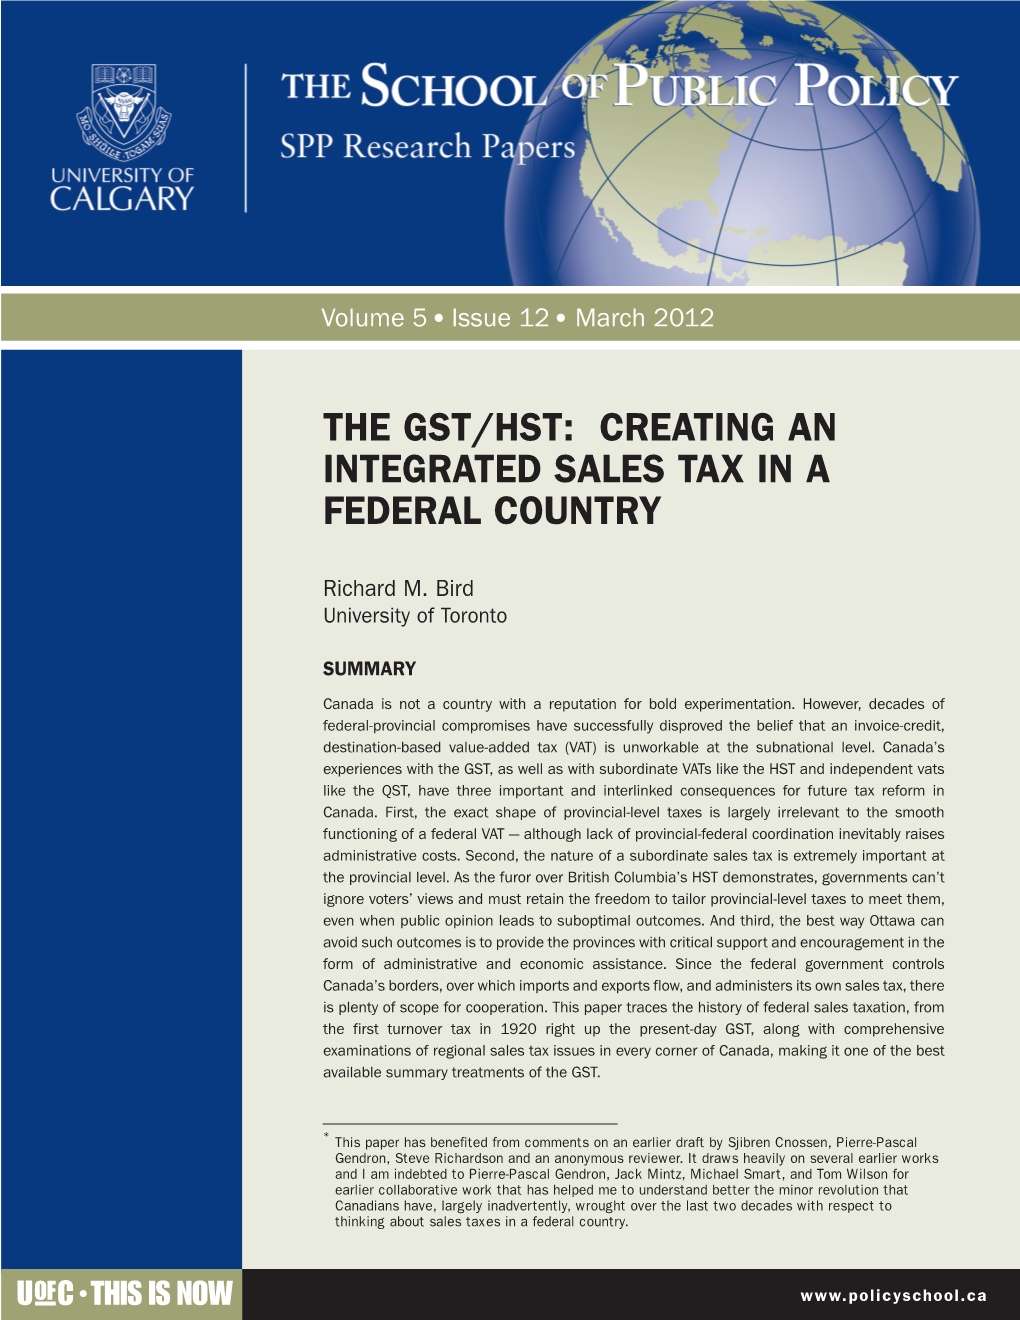 The Gst/Hst: Creating an Integrated Sales Tax in a Federal Country